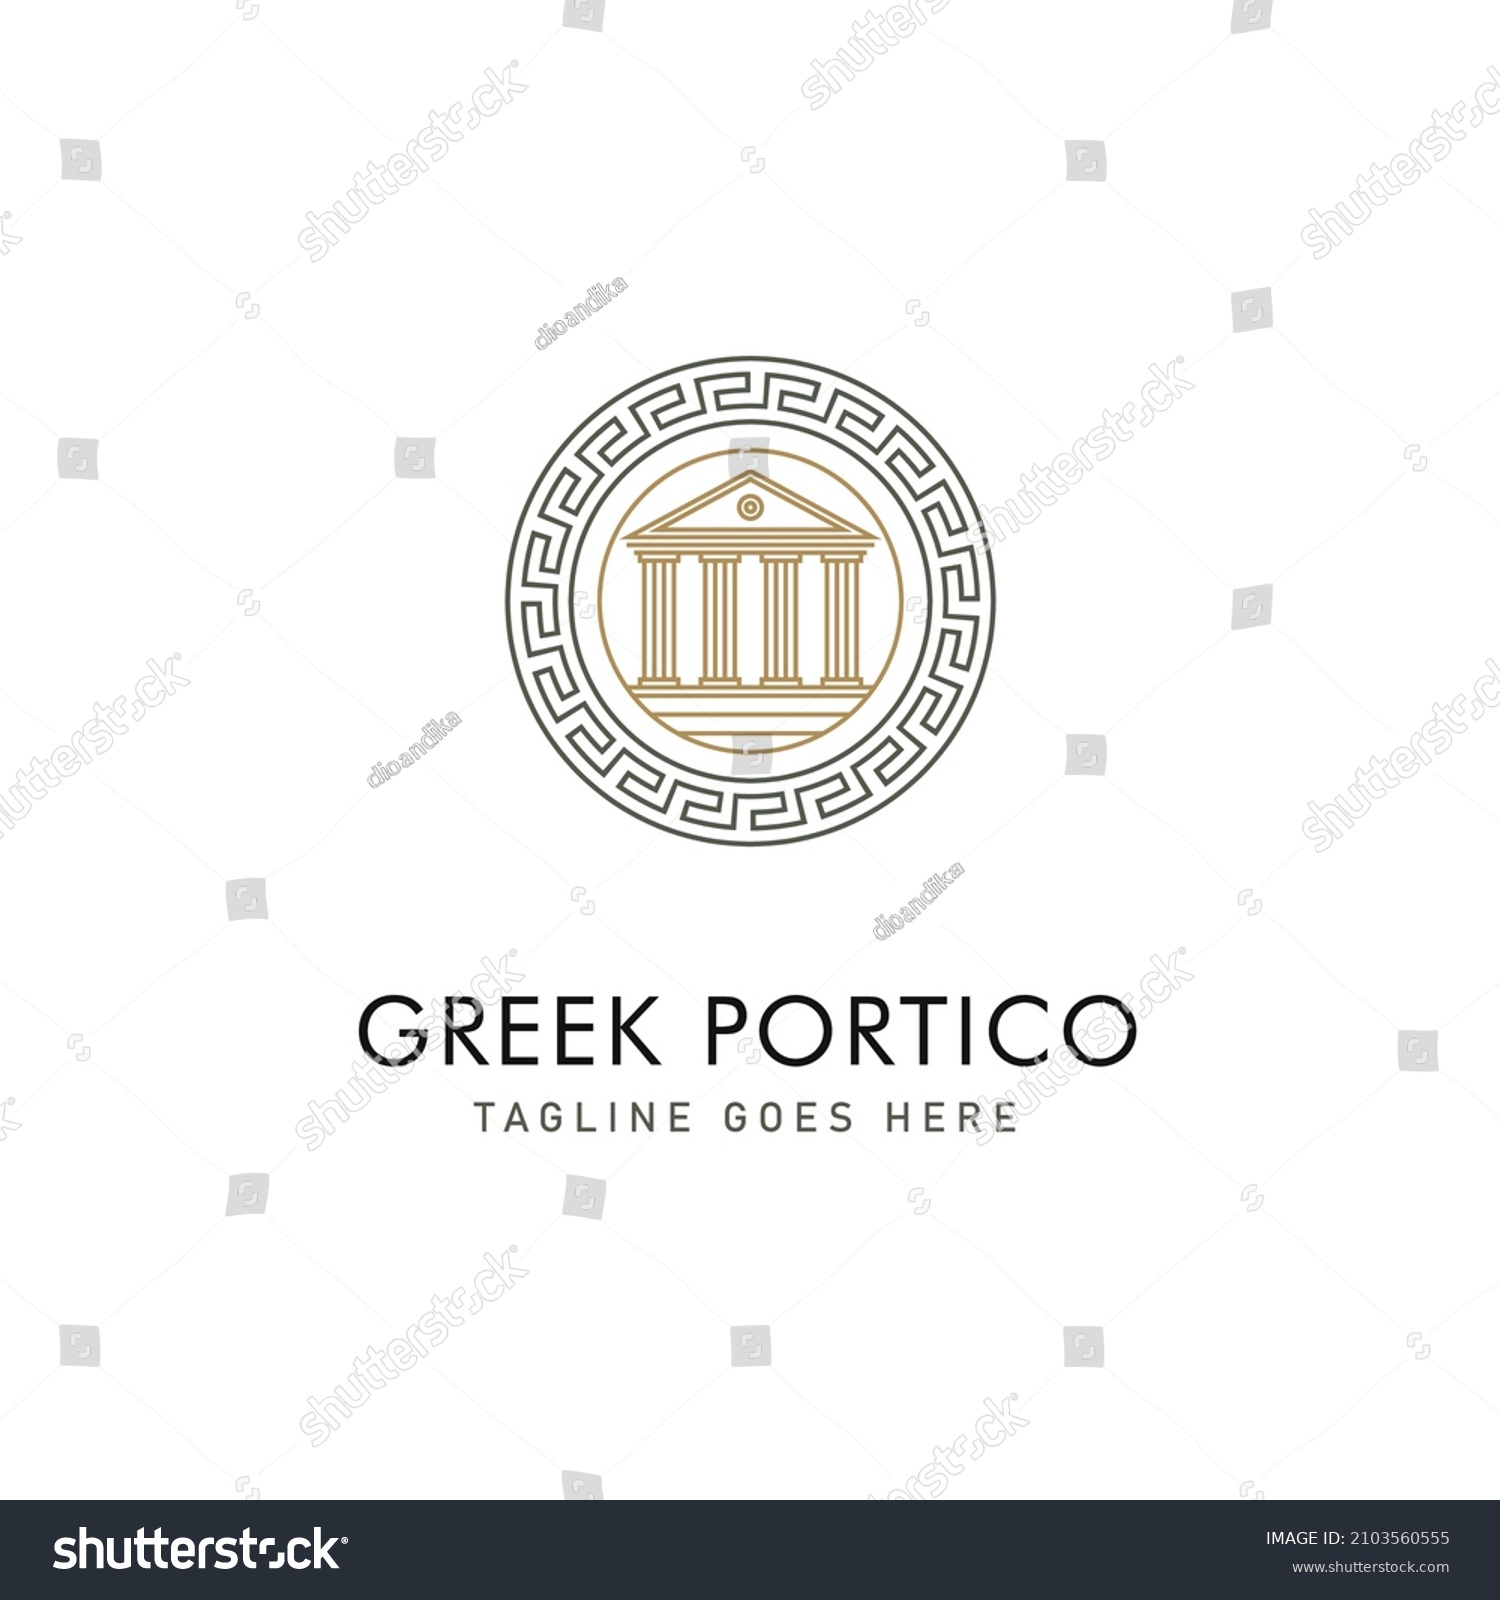 SVG of Ancient Greek or Romans architecture pillar or temple logo design vector, can be used also for law firm company svg